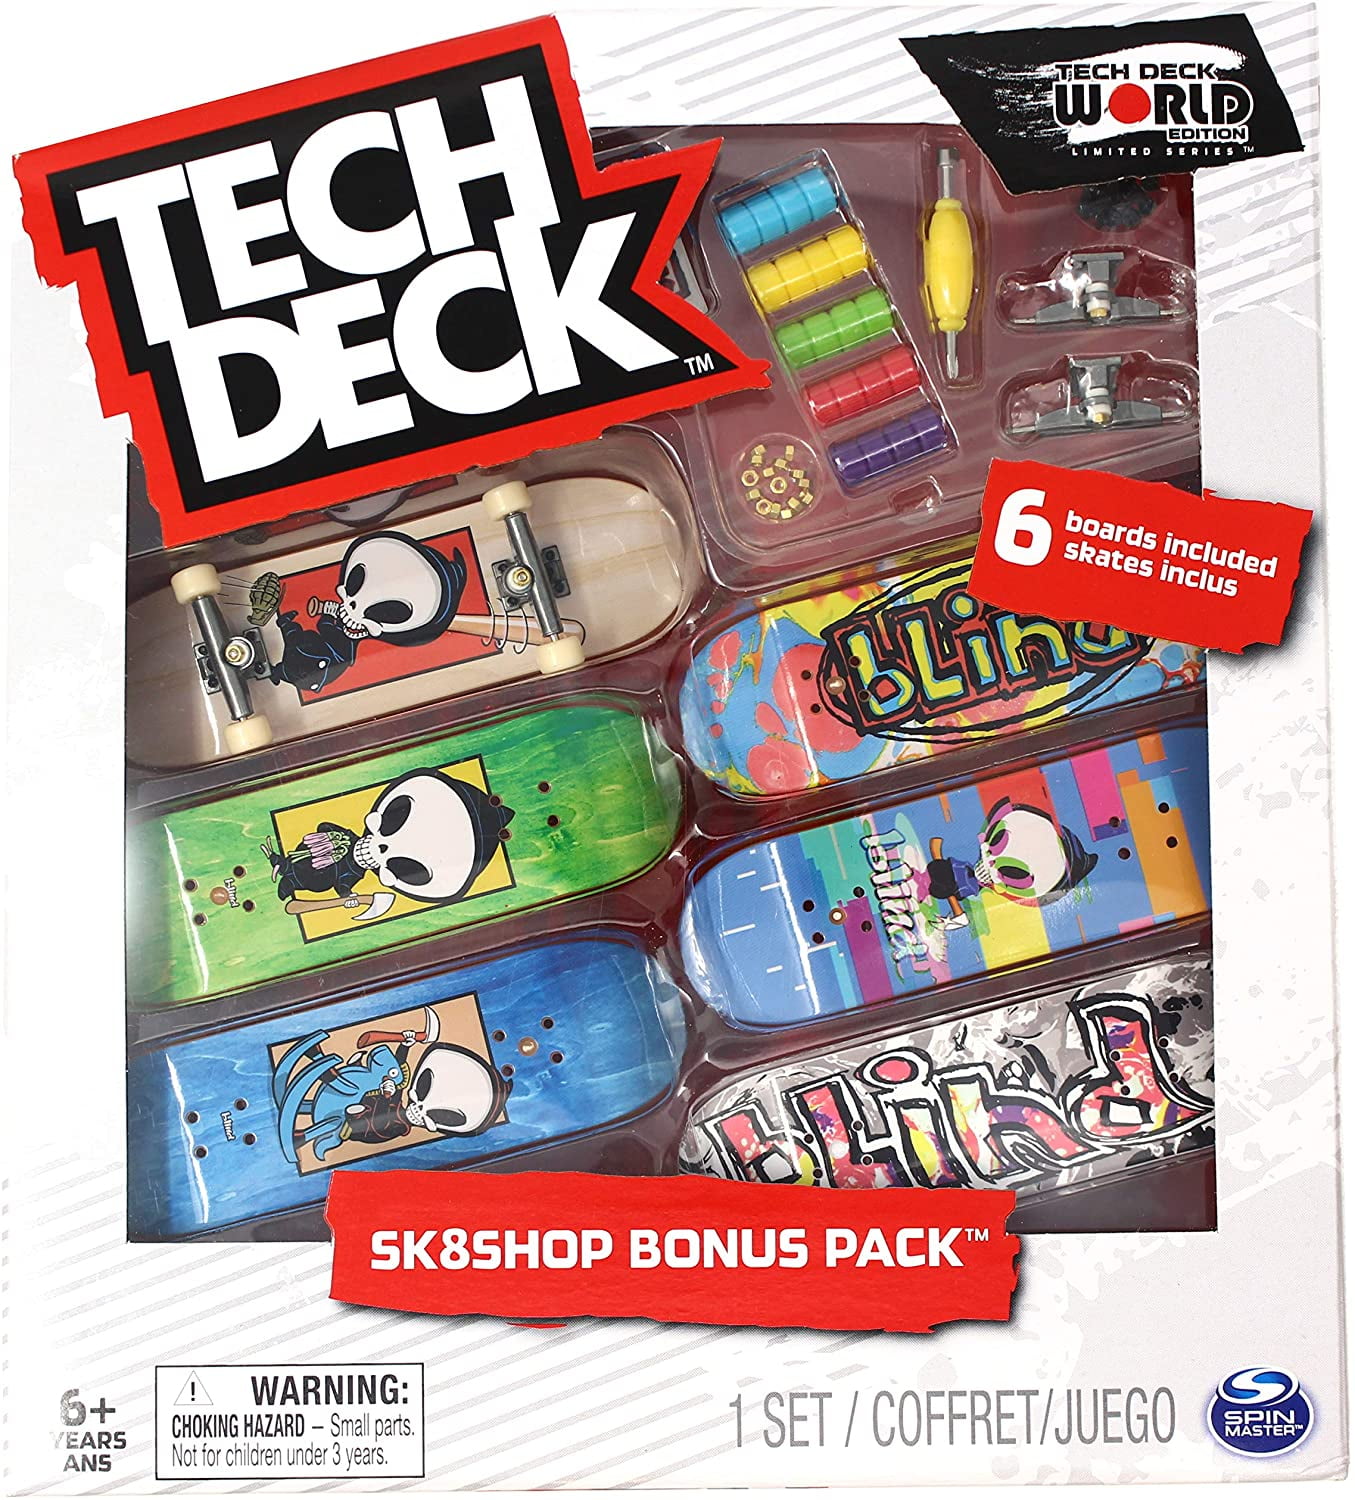 FREE SHIP Tech Deck 6 Pack SK8SHOP Bonus Pack Limited World Edition Series NEW